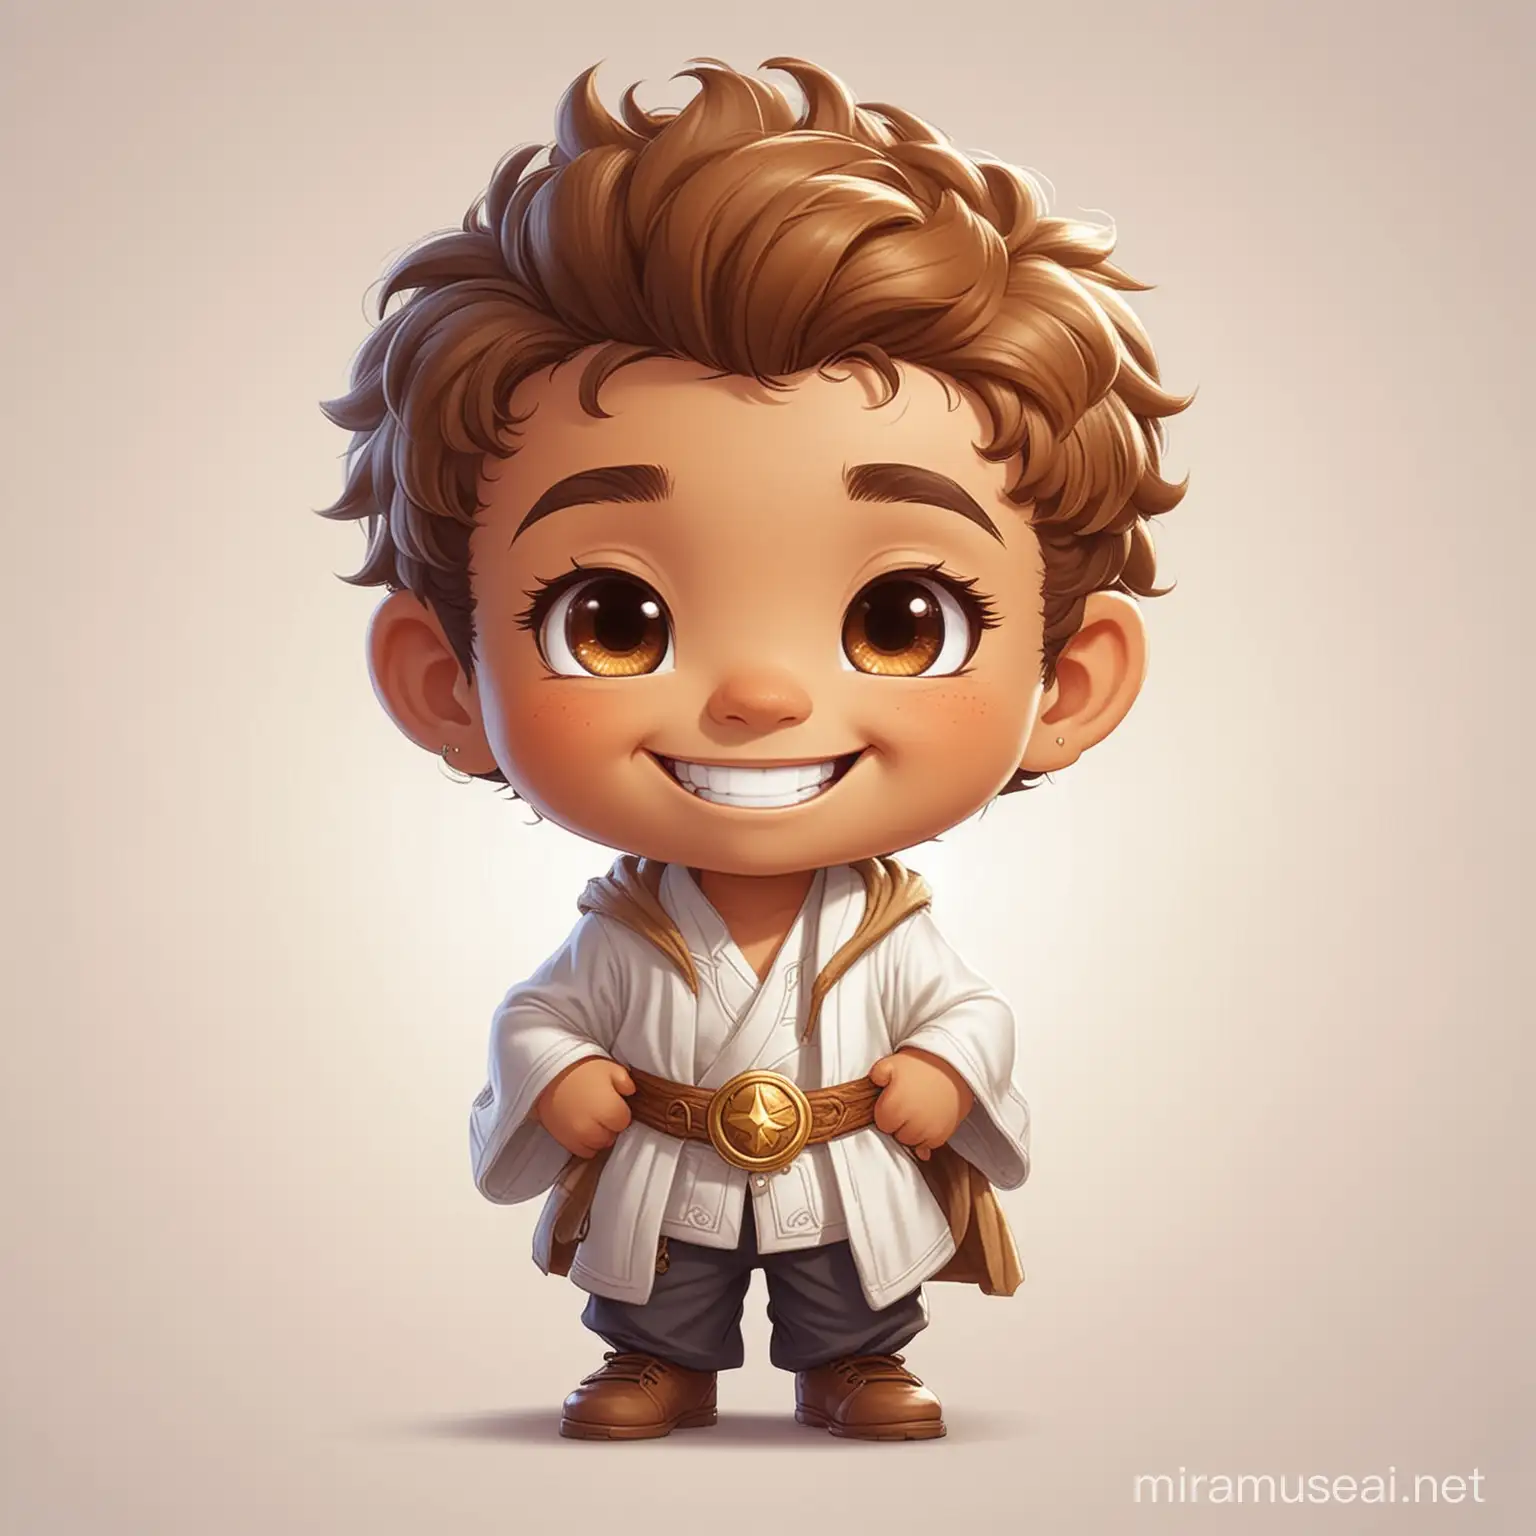 Chibi Style Magical Healer Smiling Male Child with Light Brown Skin on White Background